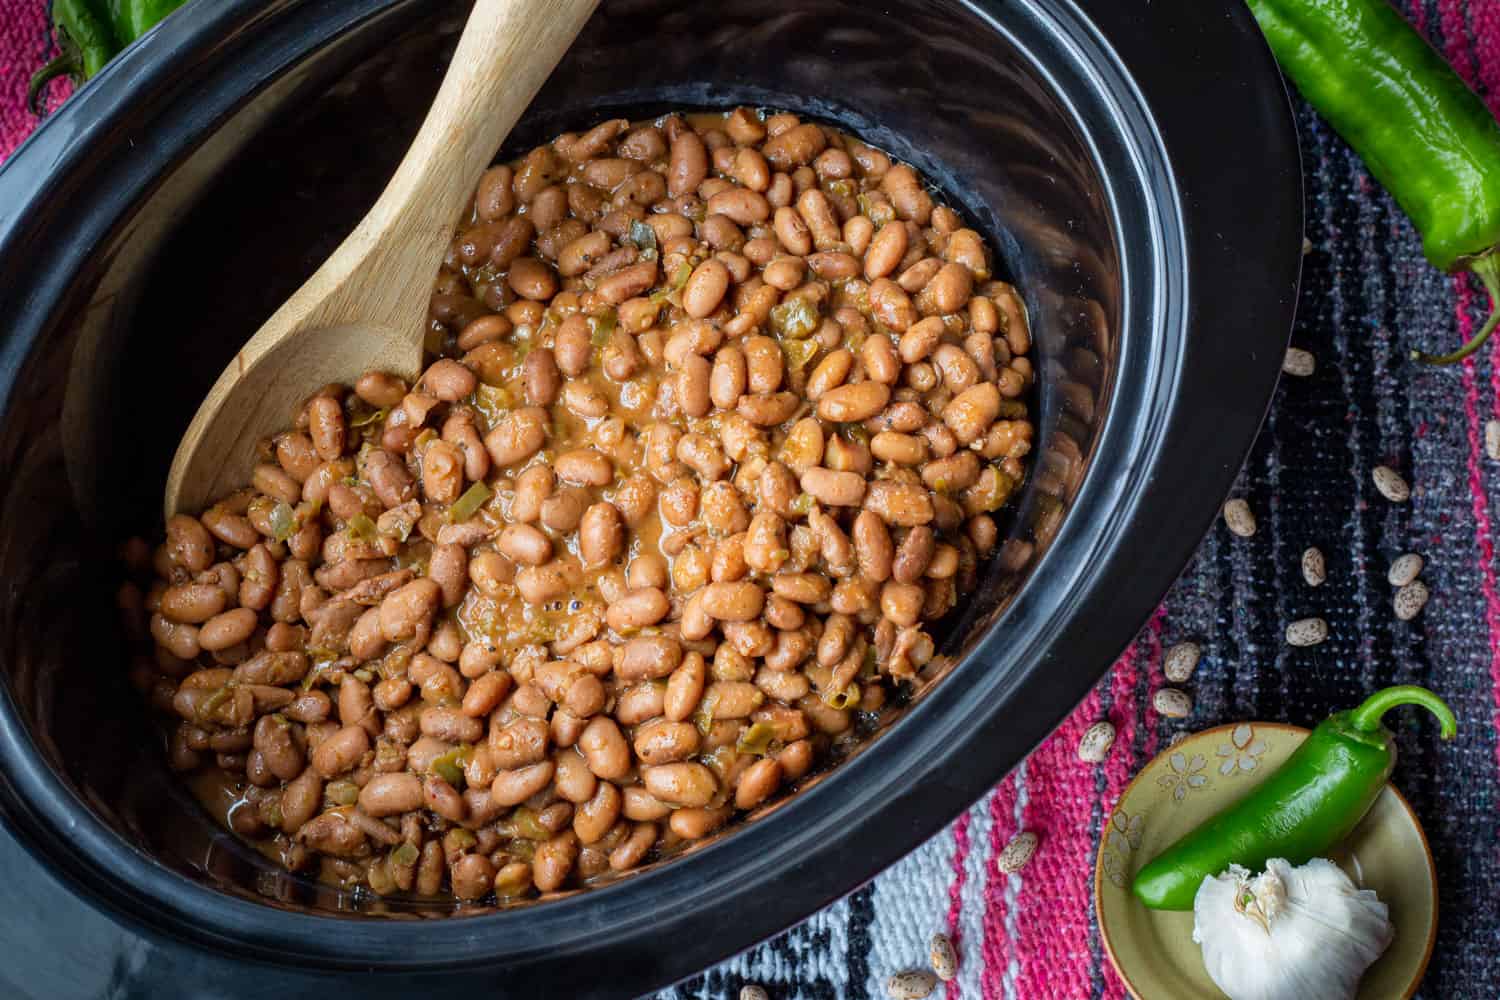 A crockpot full of glistening cooked pinto beans just cooked, served atop of festive mexican blanket.